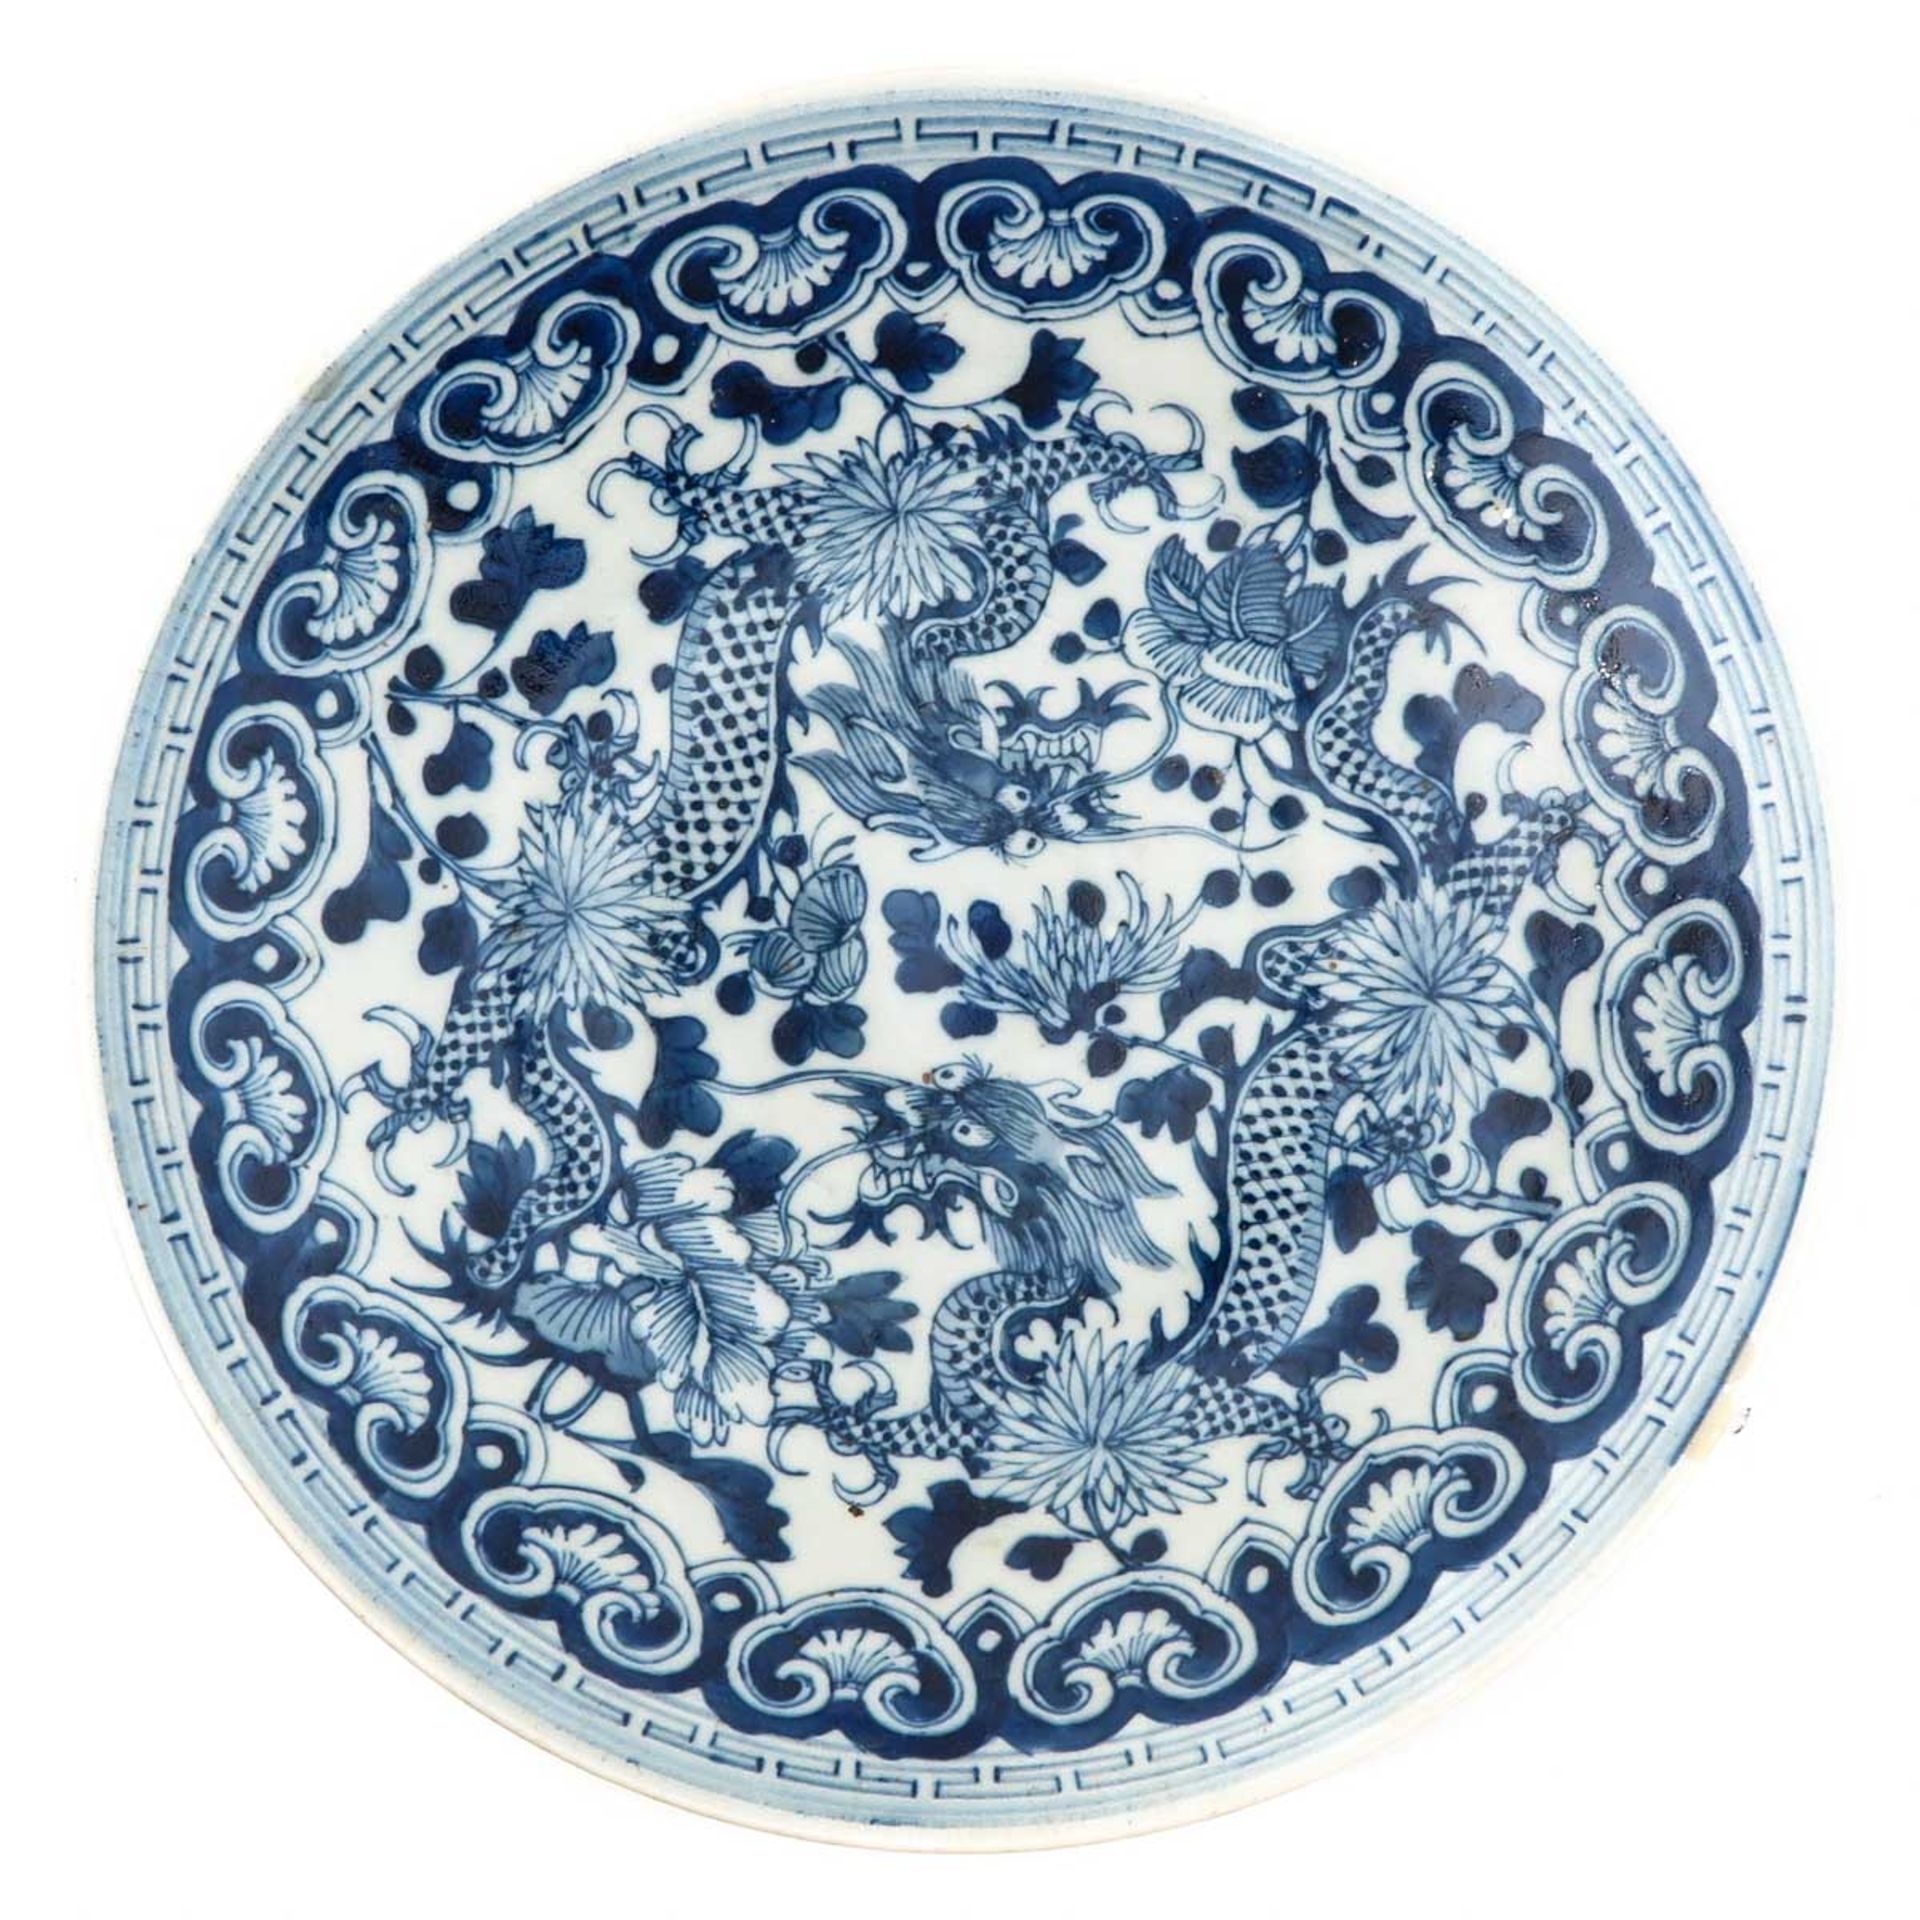 A Blue and White Dragon Plate